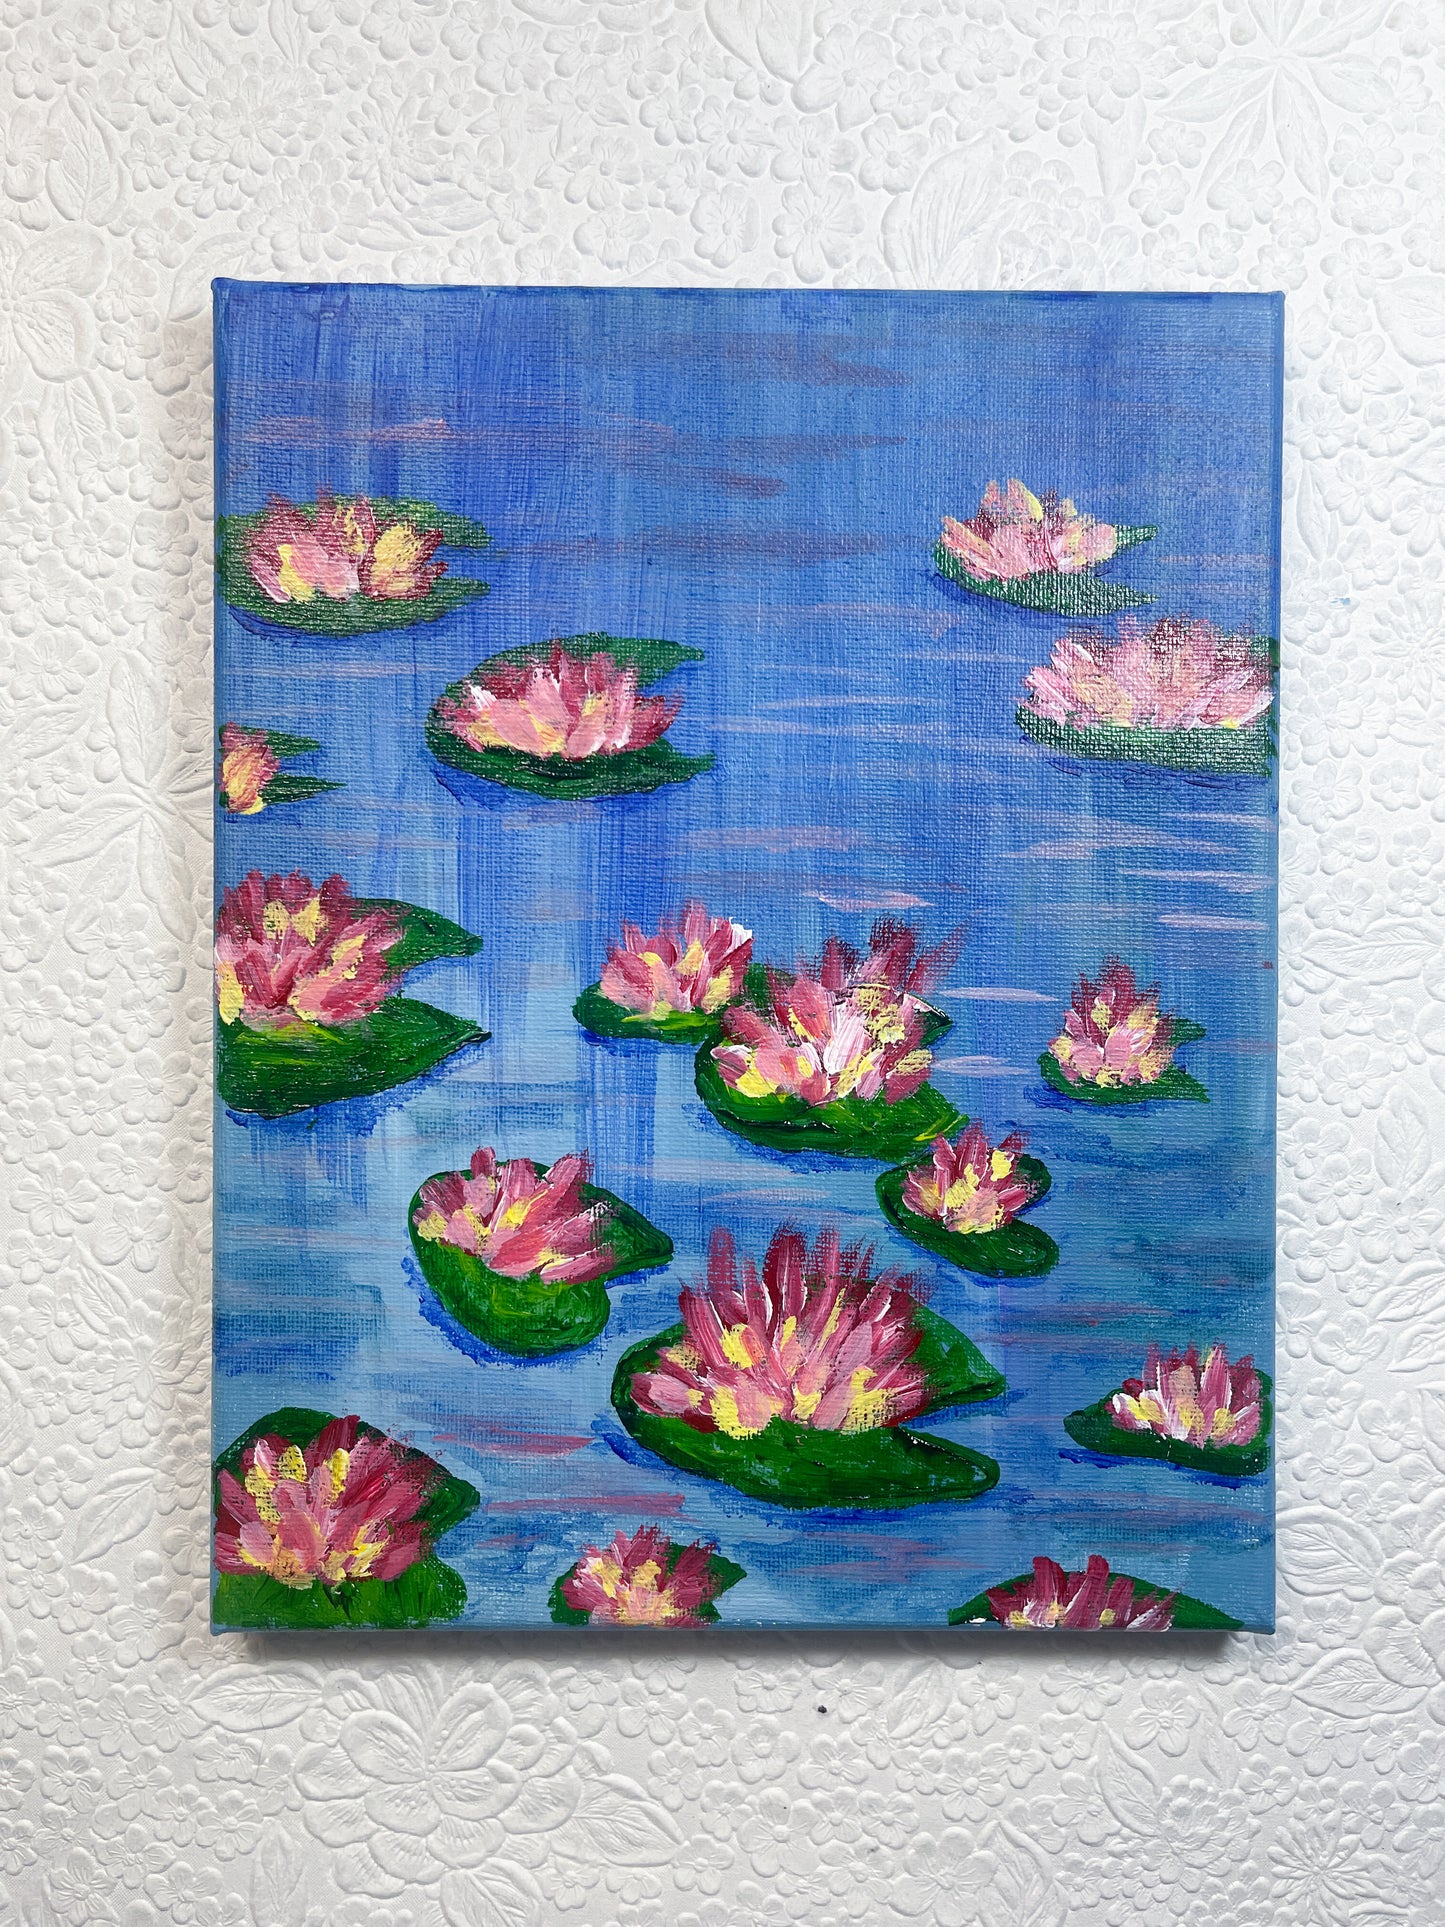 Lily Pads | Original Painting on Canvas